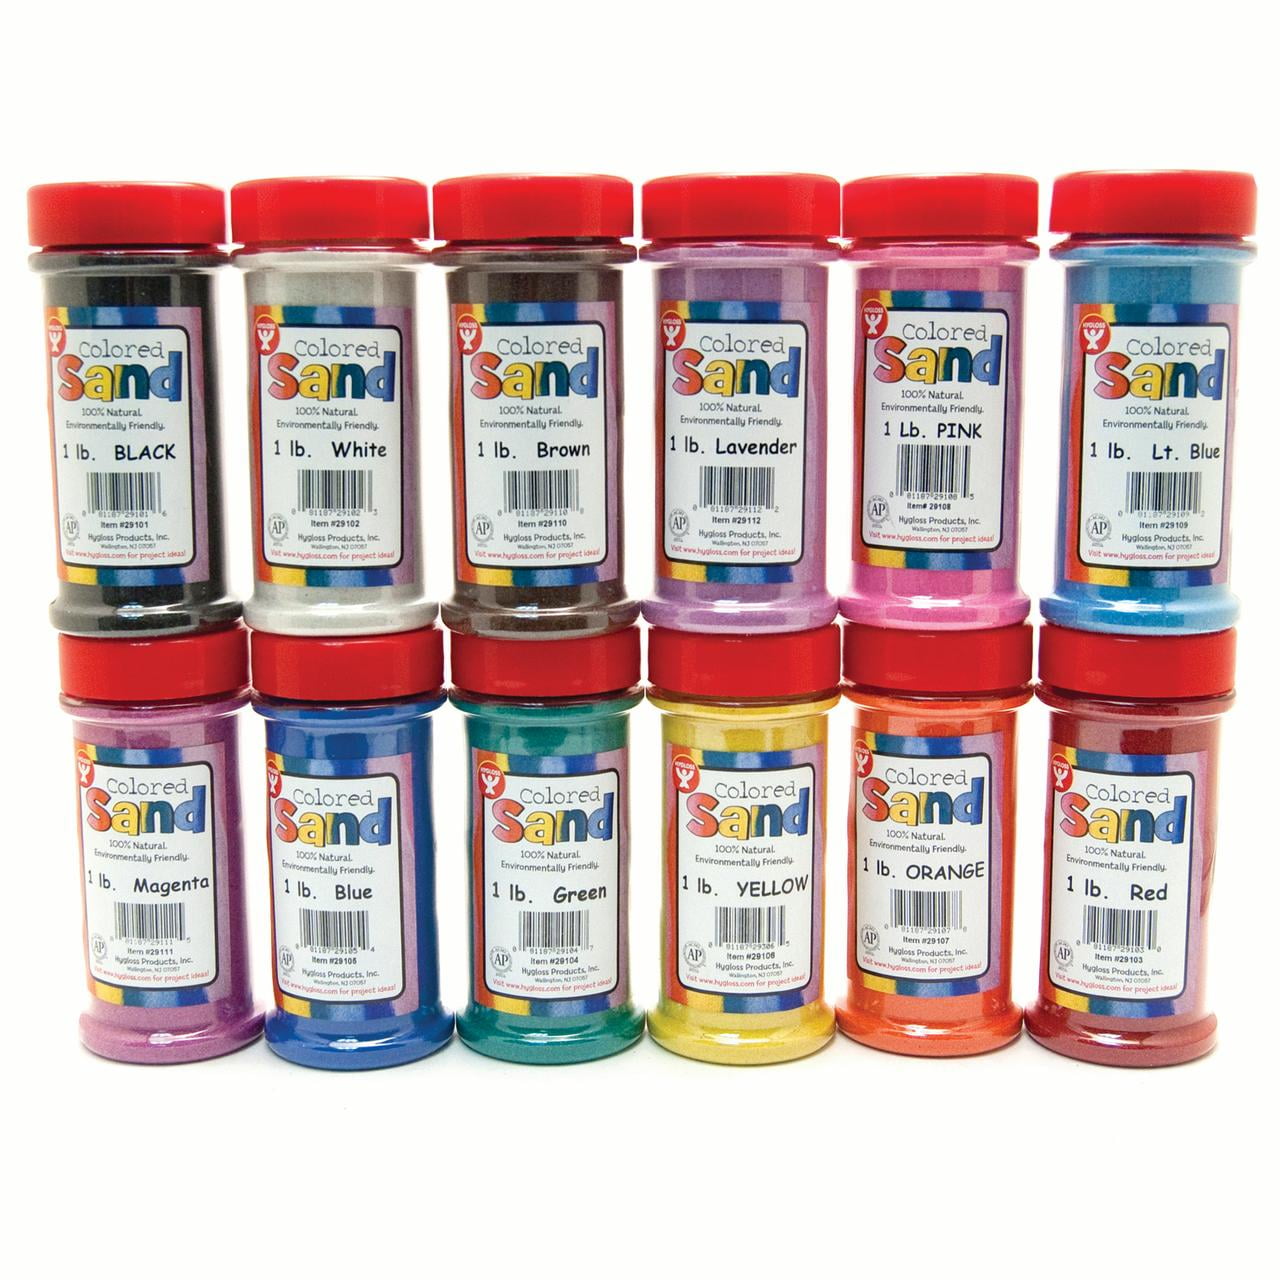 Pink Assorted Colorful Craft Art Bucket O Sand 3 lb Hygloss Products Colored Play Sand 